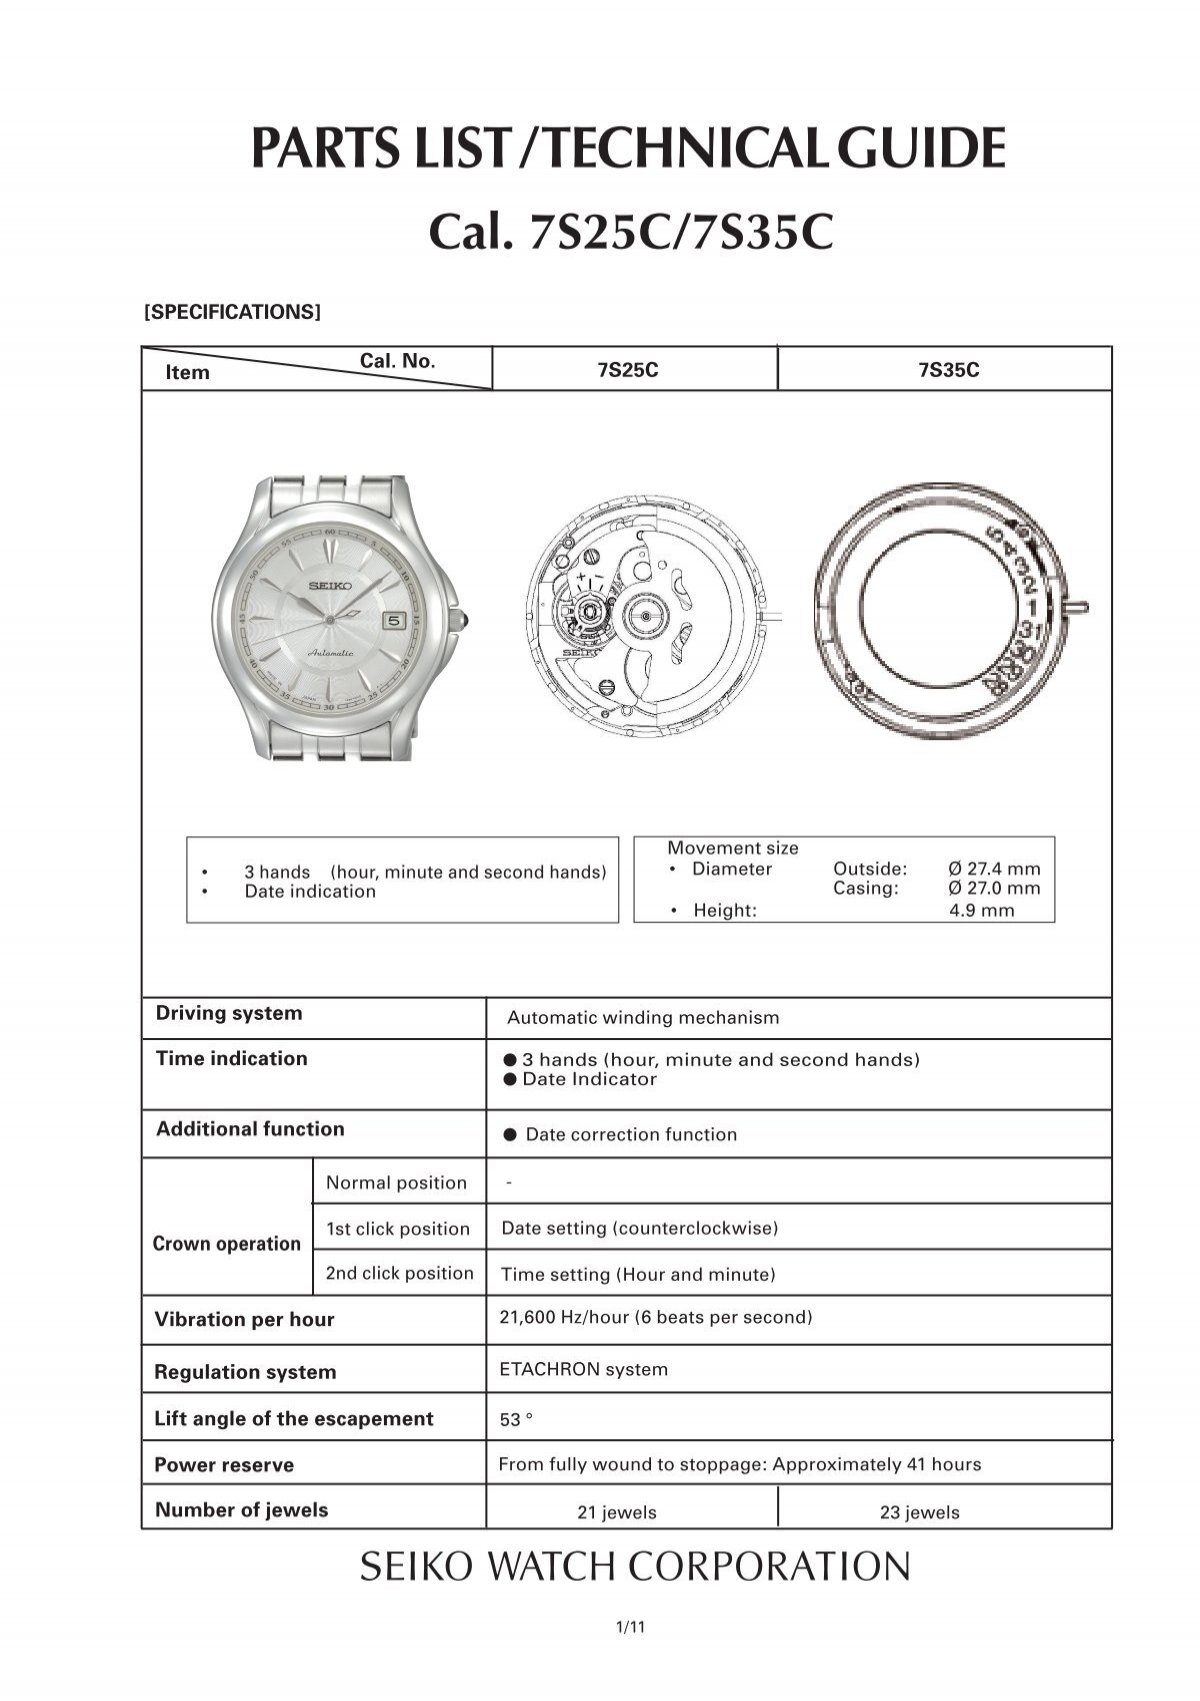 PARTS LIST / TECHNICAL GUIDE Cal. 7S25C/7S35C - Seiko